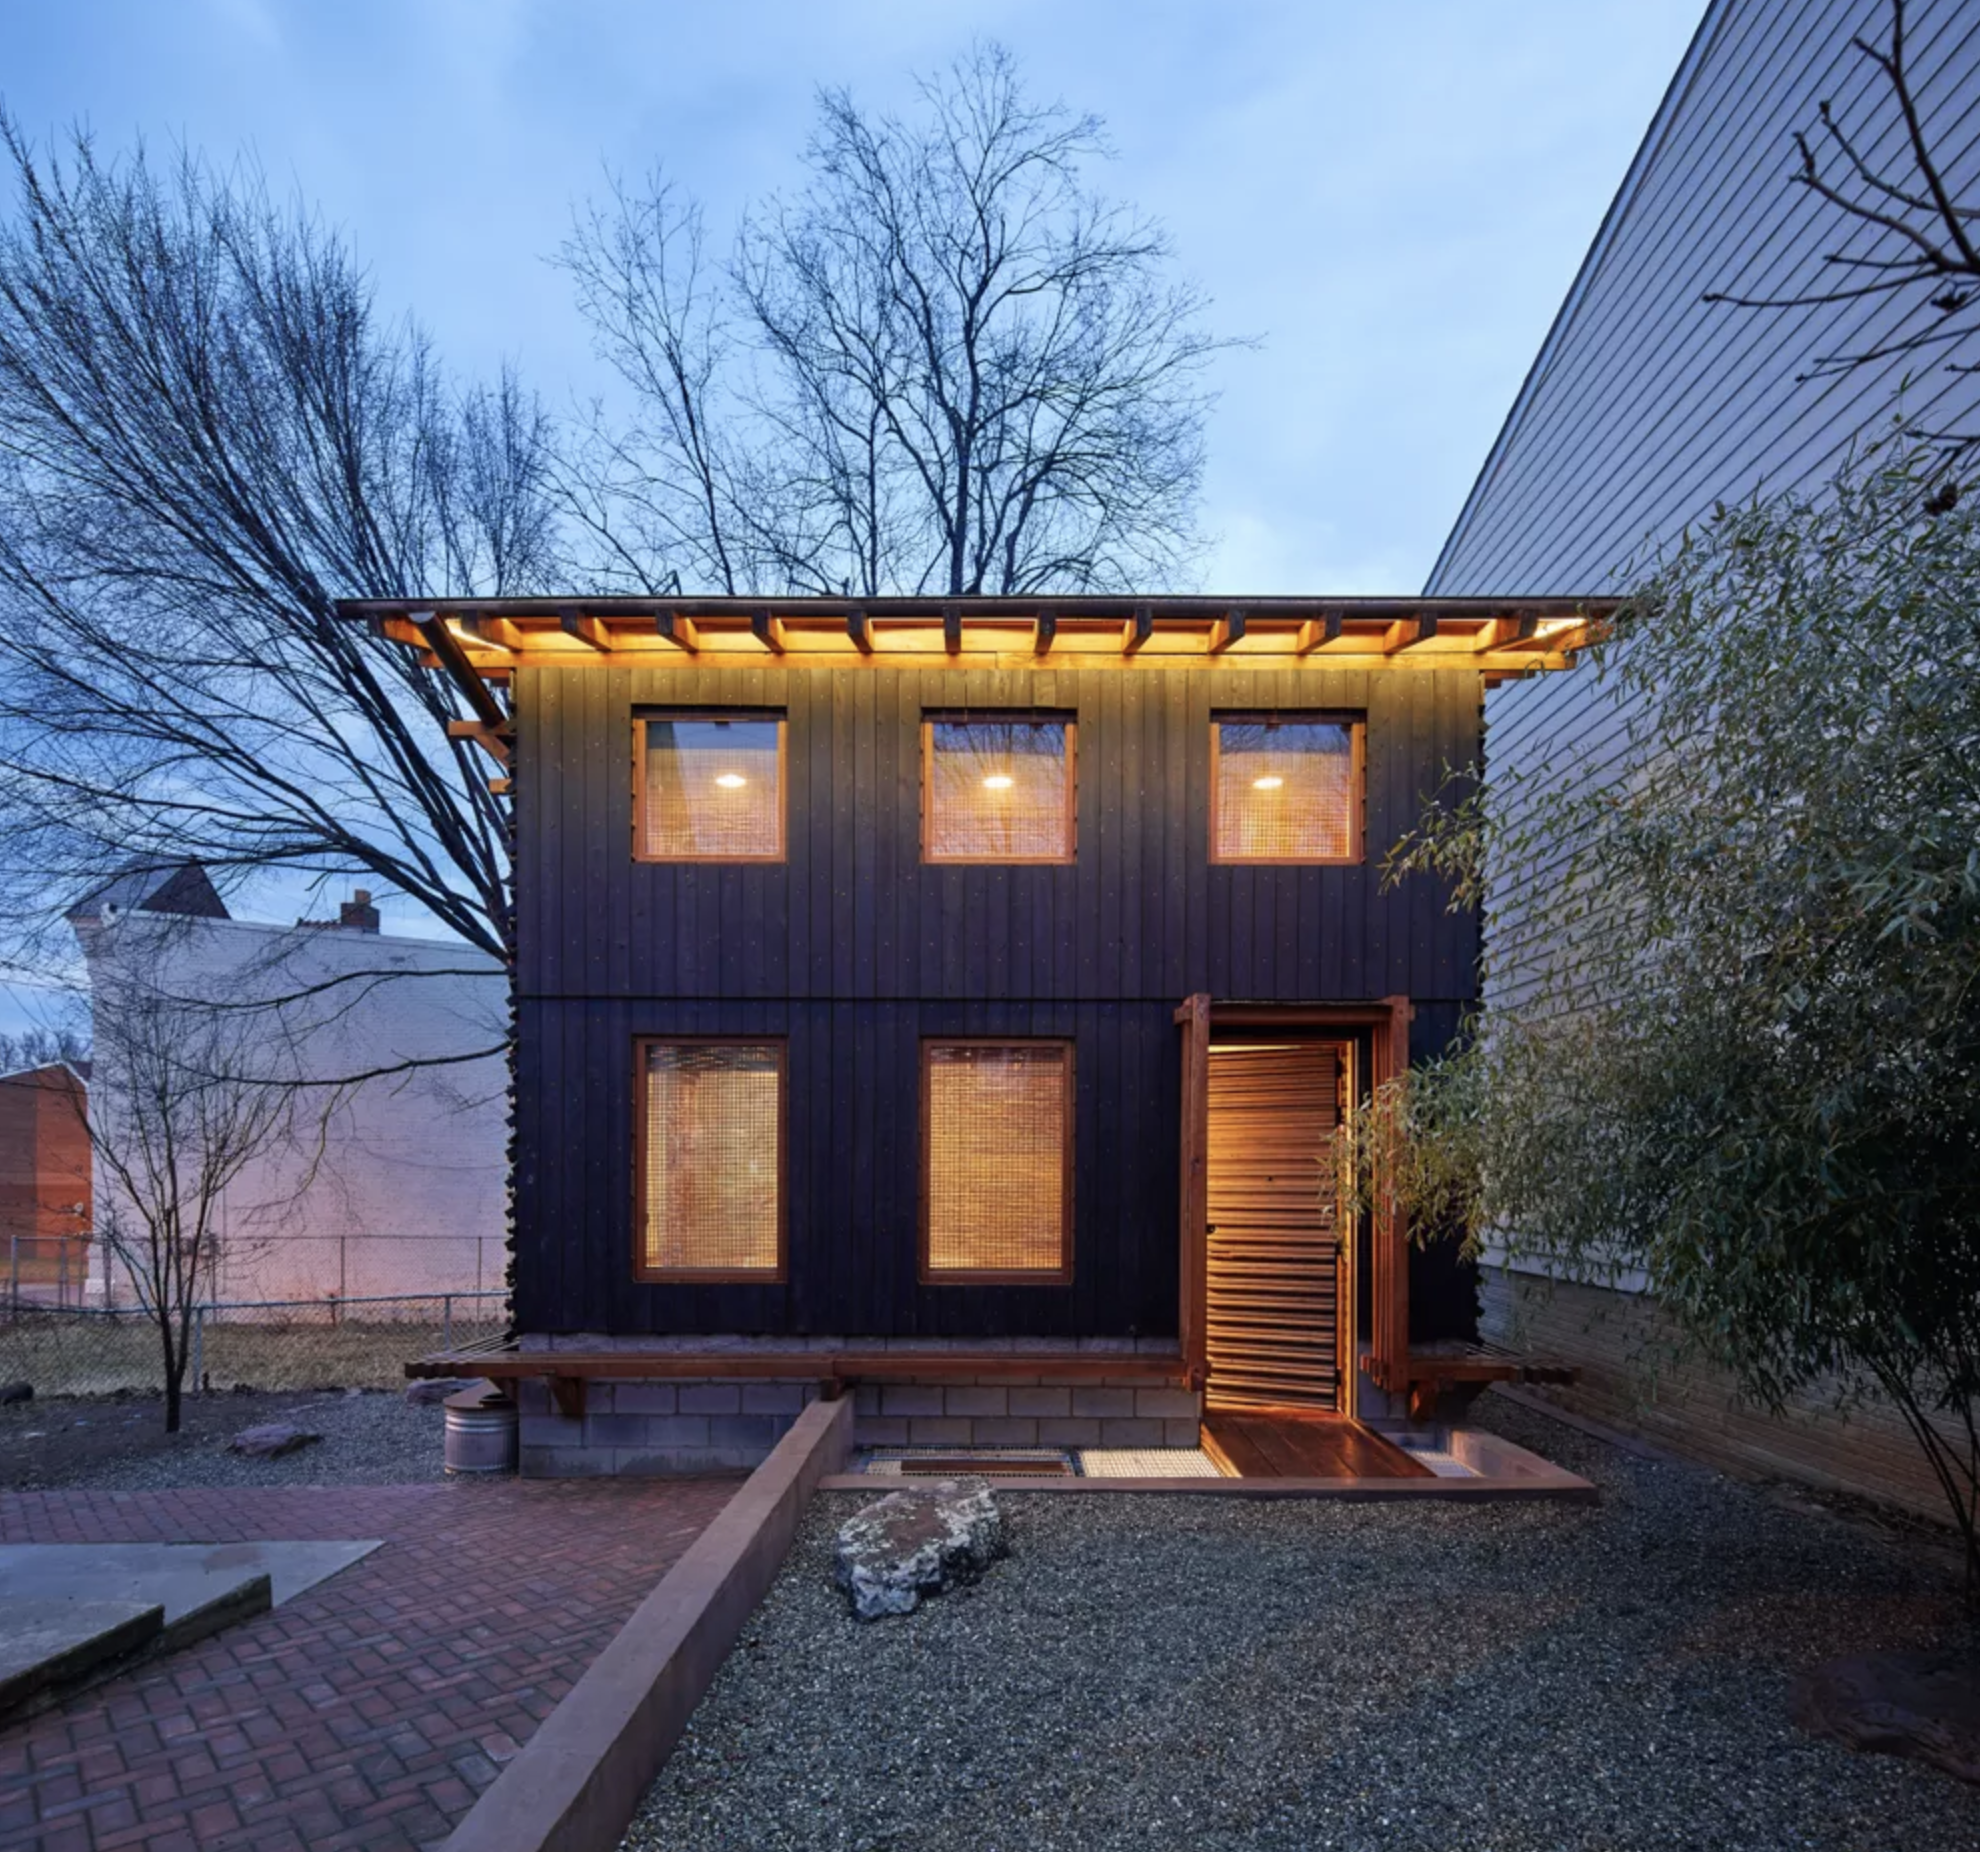 The all-bamboo Grass House in Washington, D.C.